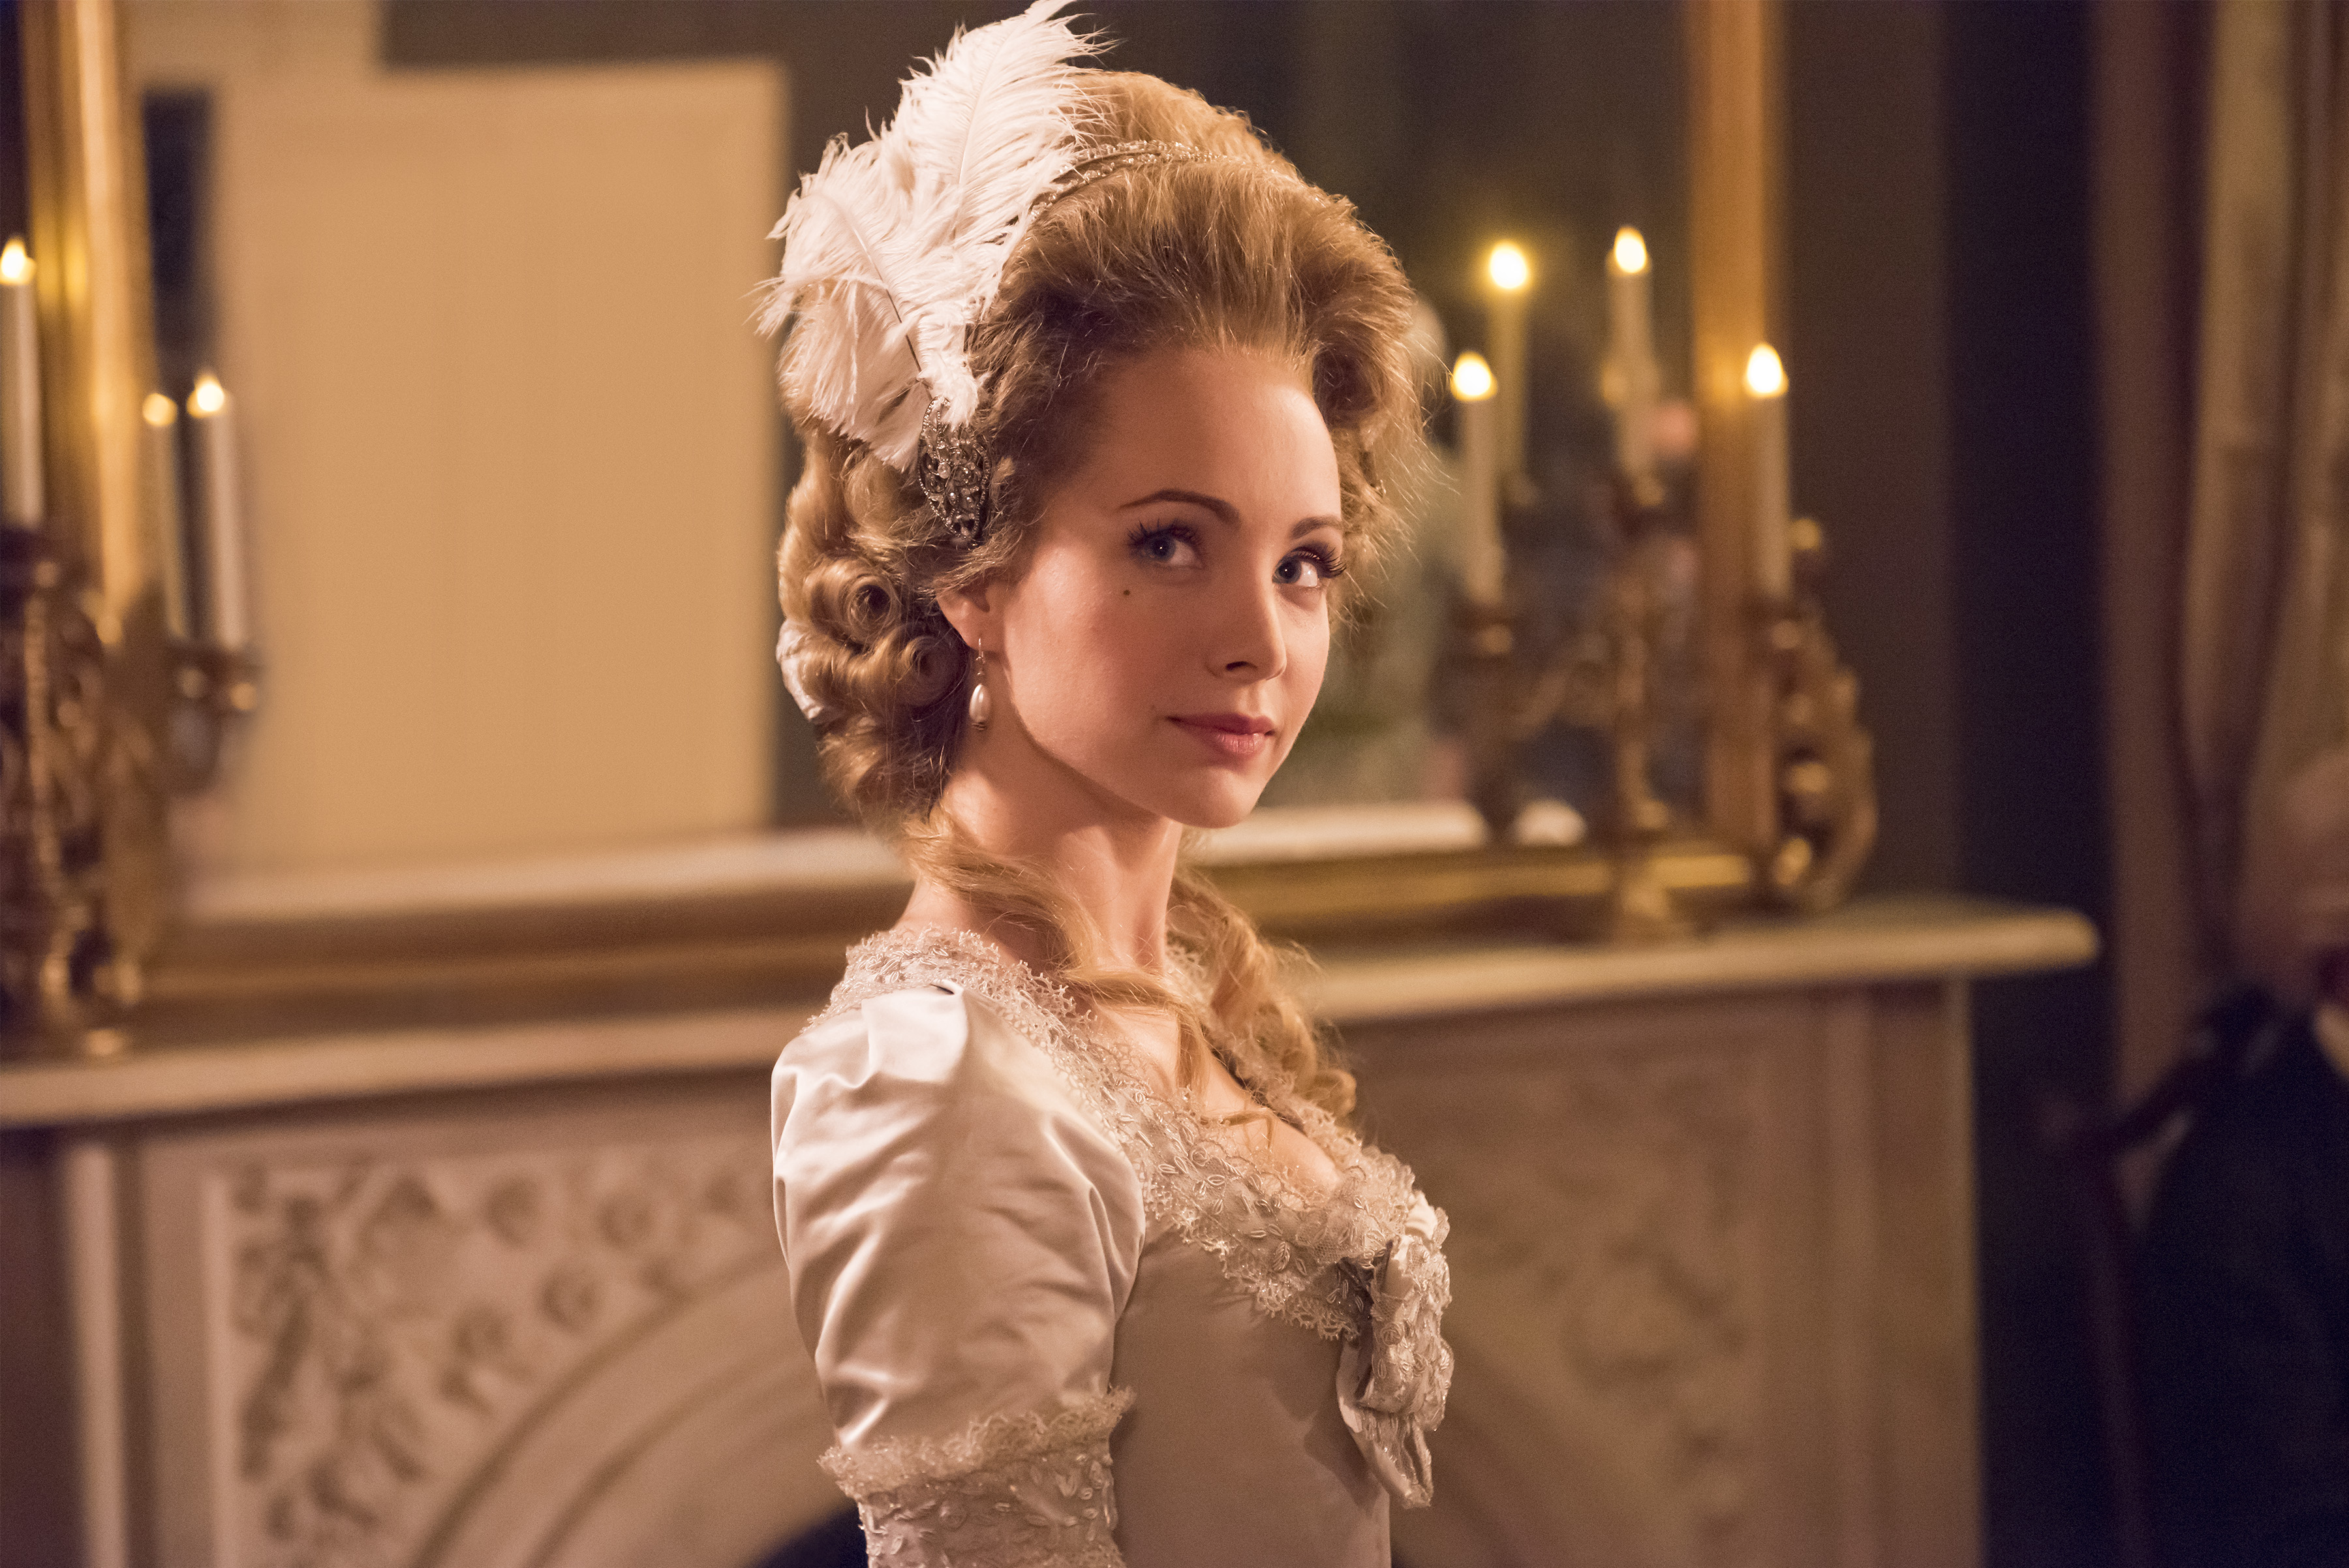 Peggy Shippen as played by Ksenia Solo in TURN Washingtons Spies